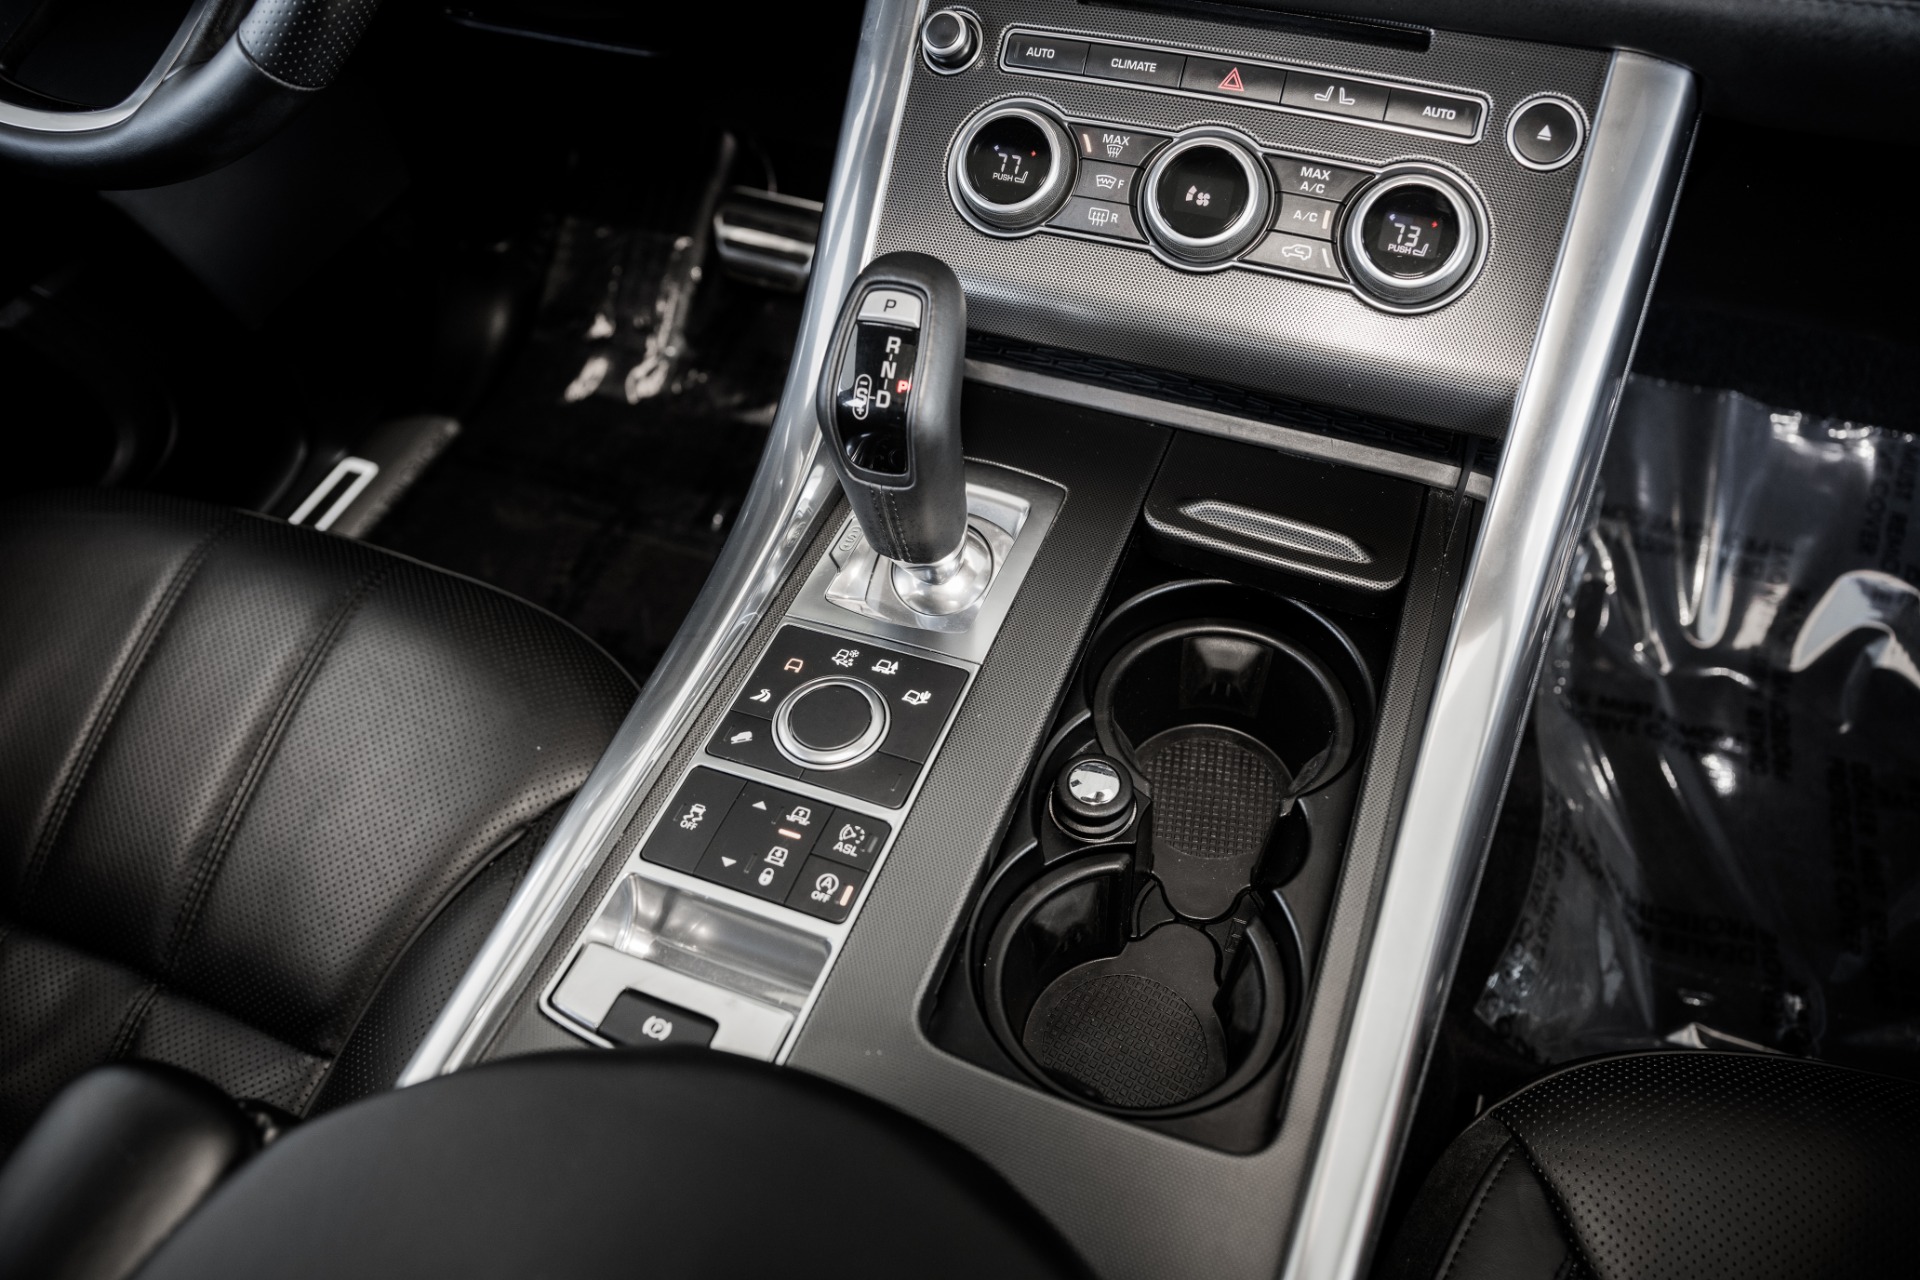 2006 Land Rover Range Rover Supercharged in Black - Gear shifter